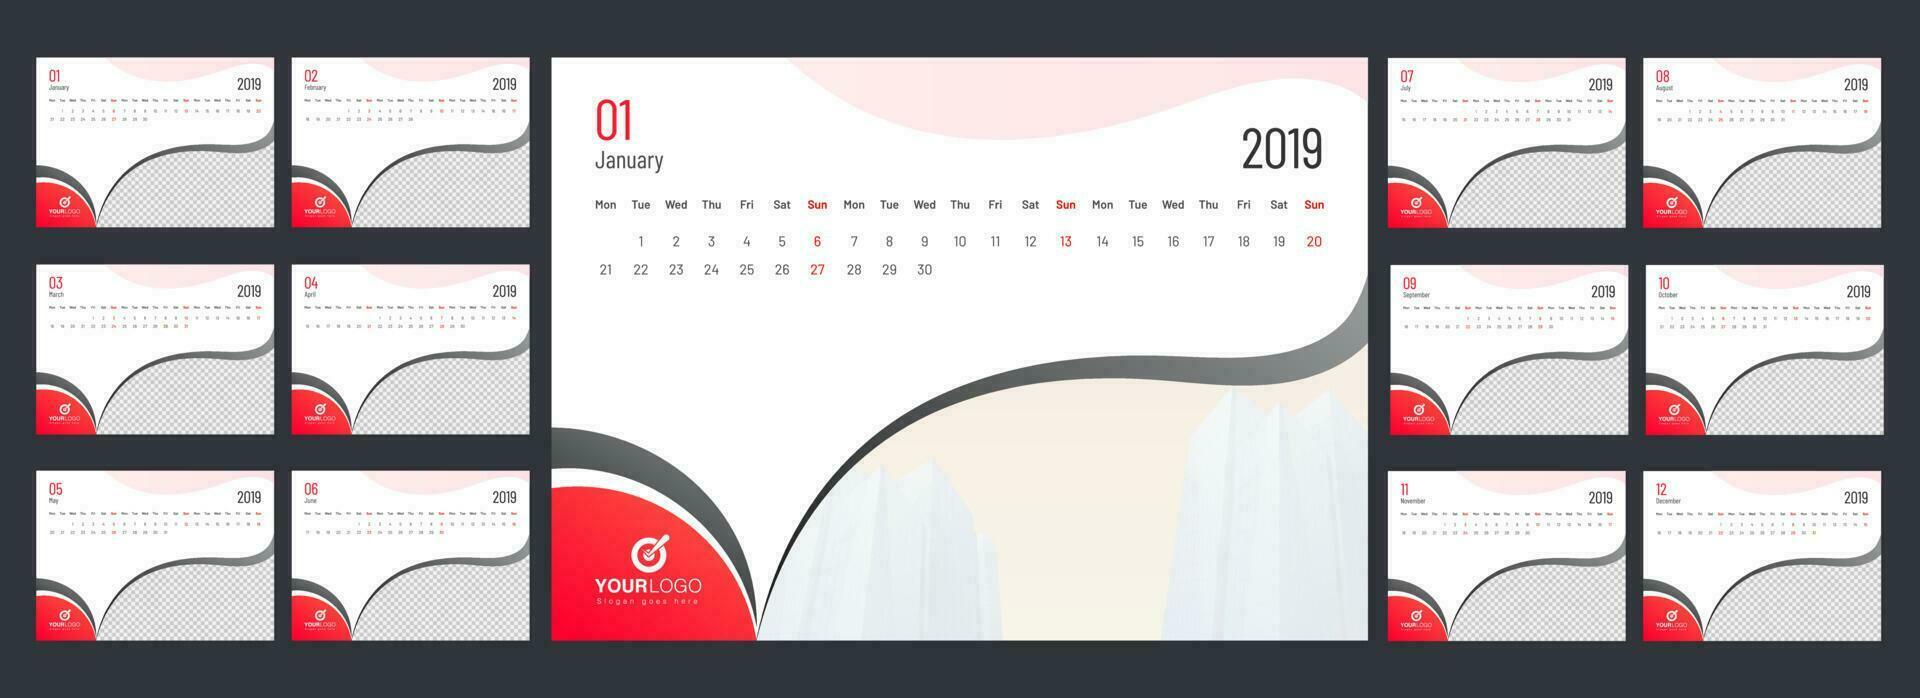 Year 2019, Calendar design with space for your image. vector